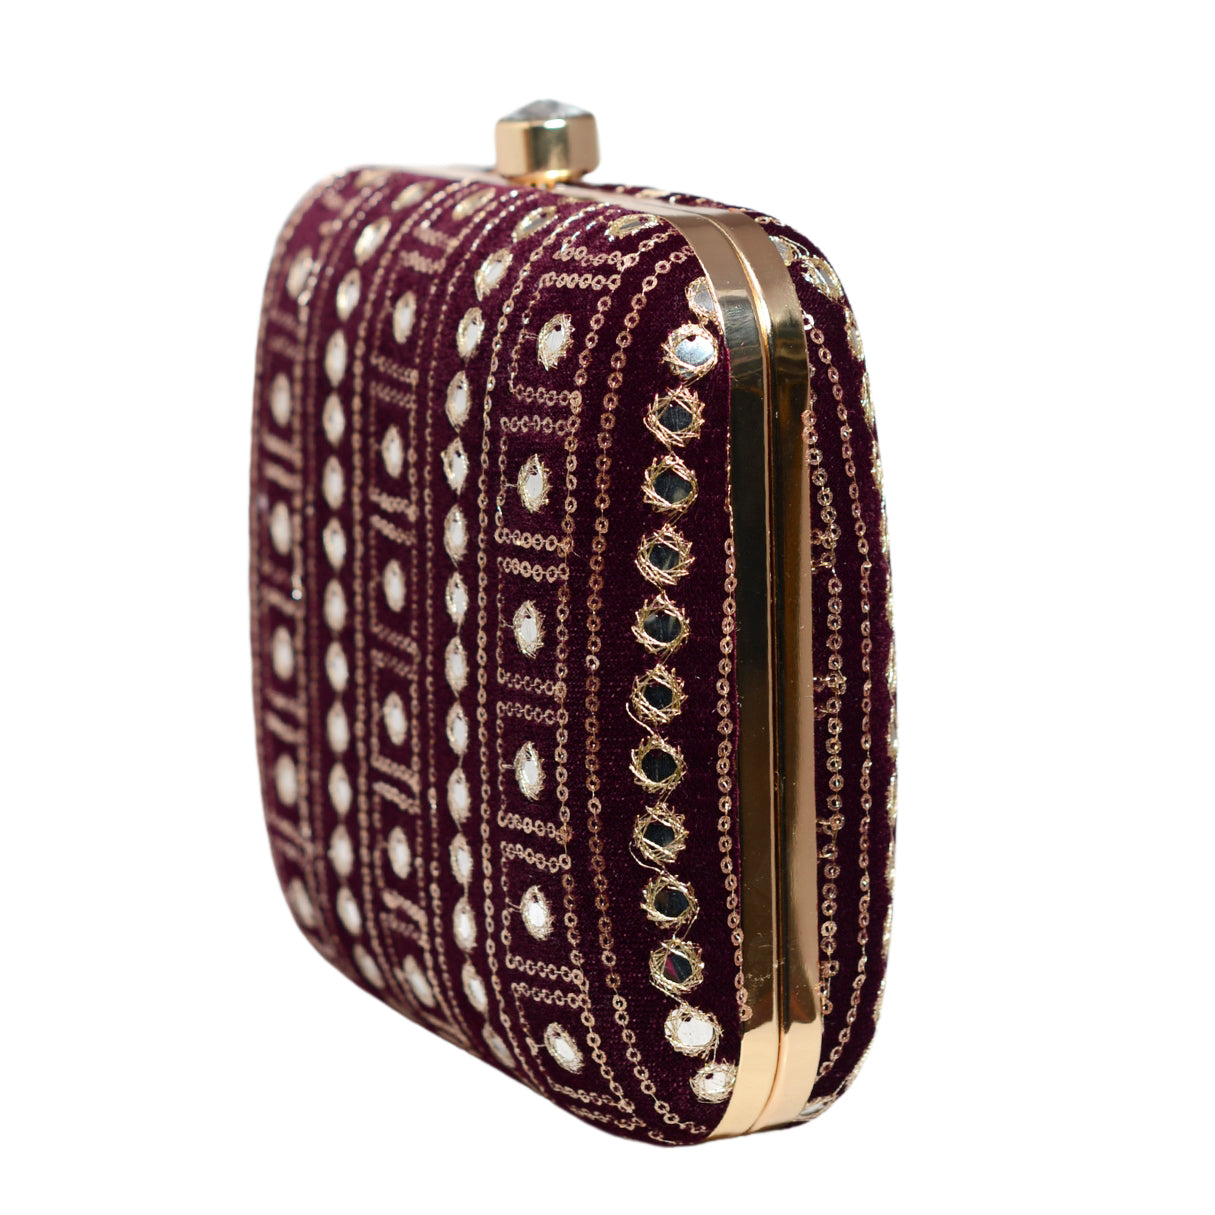 Maroon Mirror Sequins Embroidery Clutch